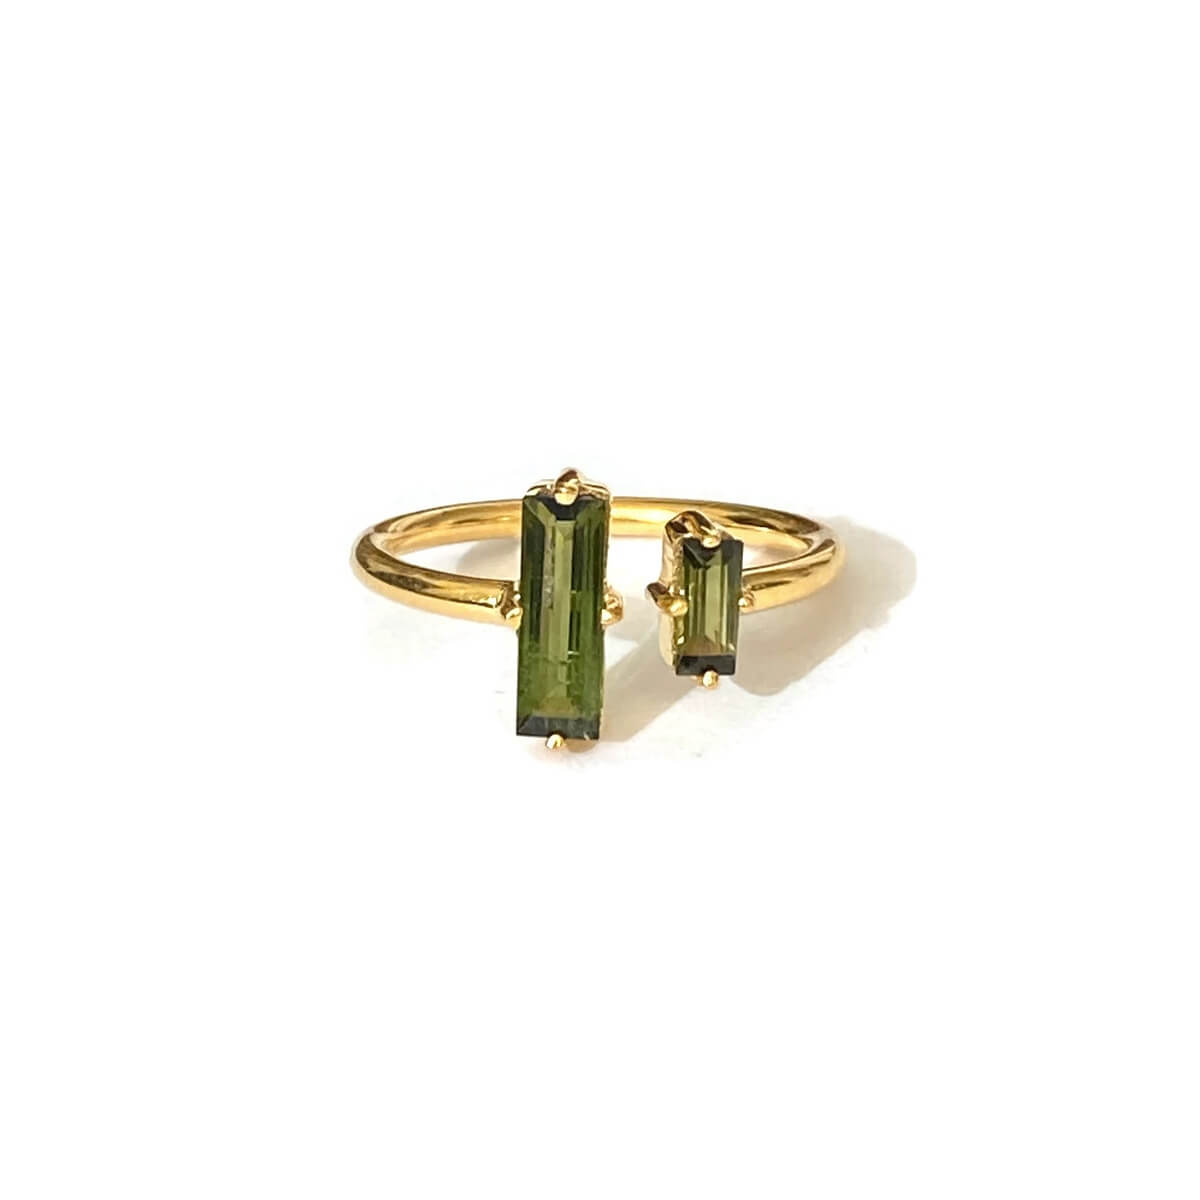 This is a green tourmaline gold ring that is made of sterling silver plated with thick layer of 18k solid gold 